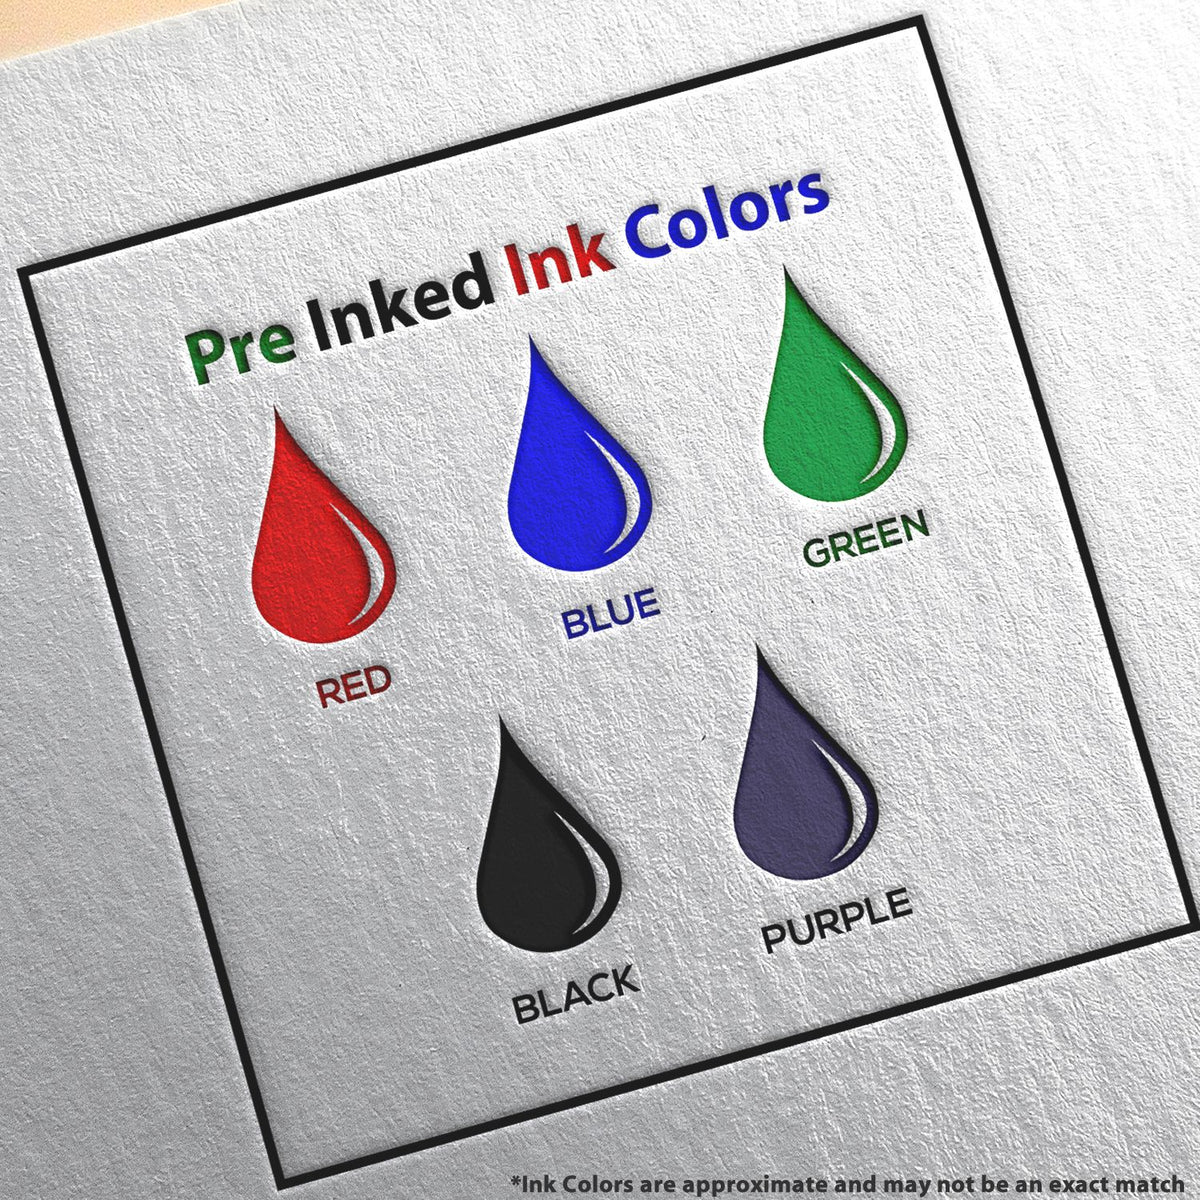 A picture showing the different ink colors or hues available for the Slim Pre-Inked Texas Land Surveyor Seal Stamp product.